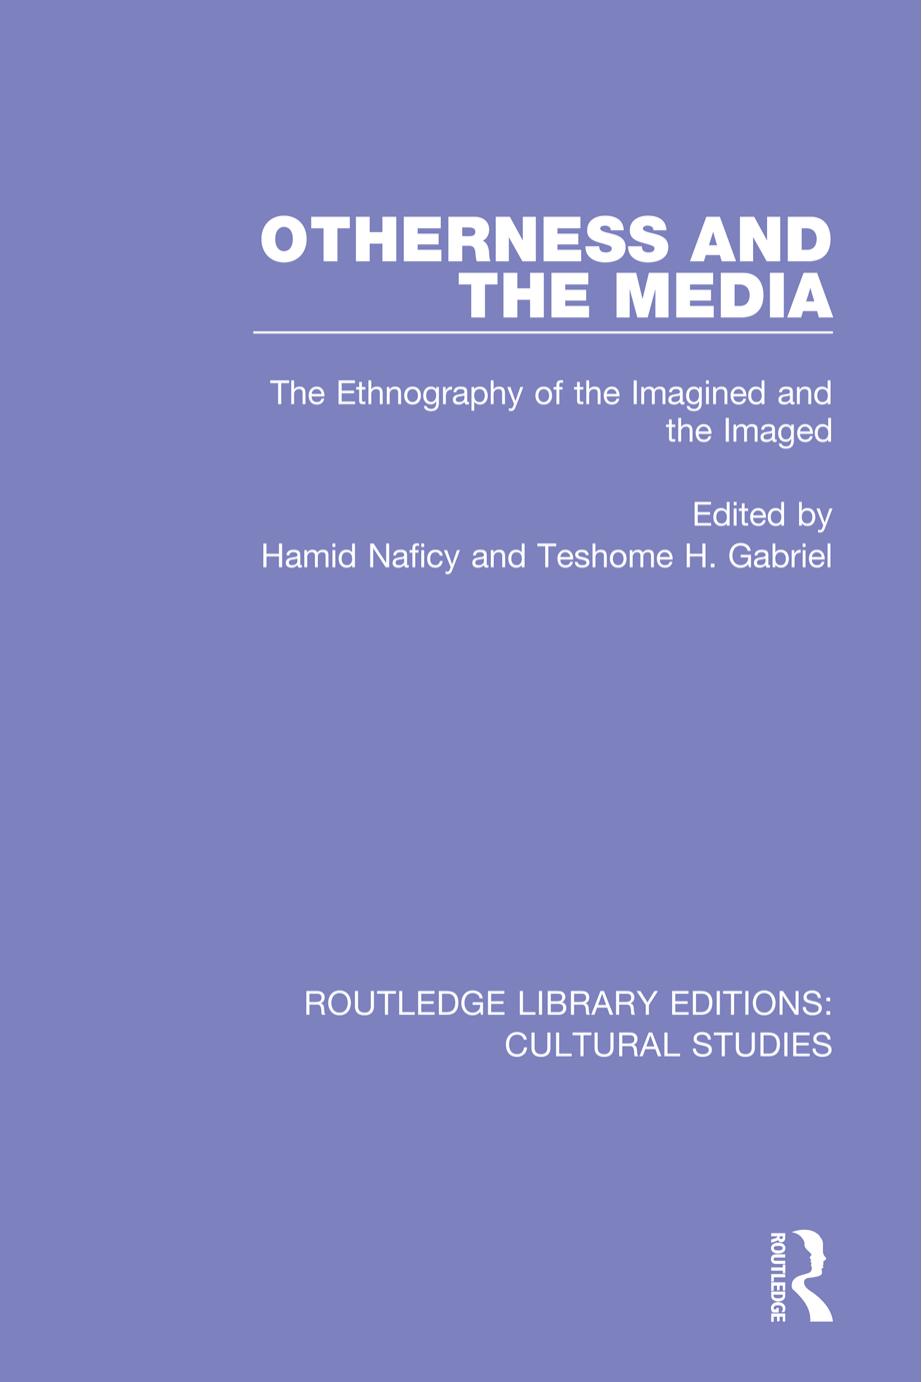 Otherness and the Media : The Ethnography of the Imagined and the Imaged by Hamid Naficy; Teshome H. Gabriel